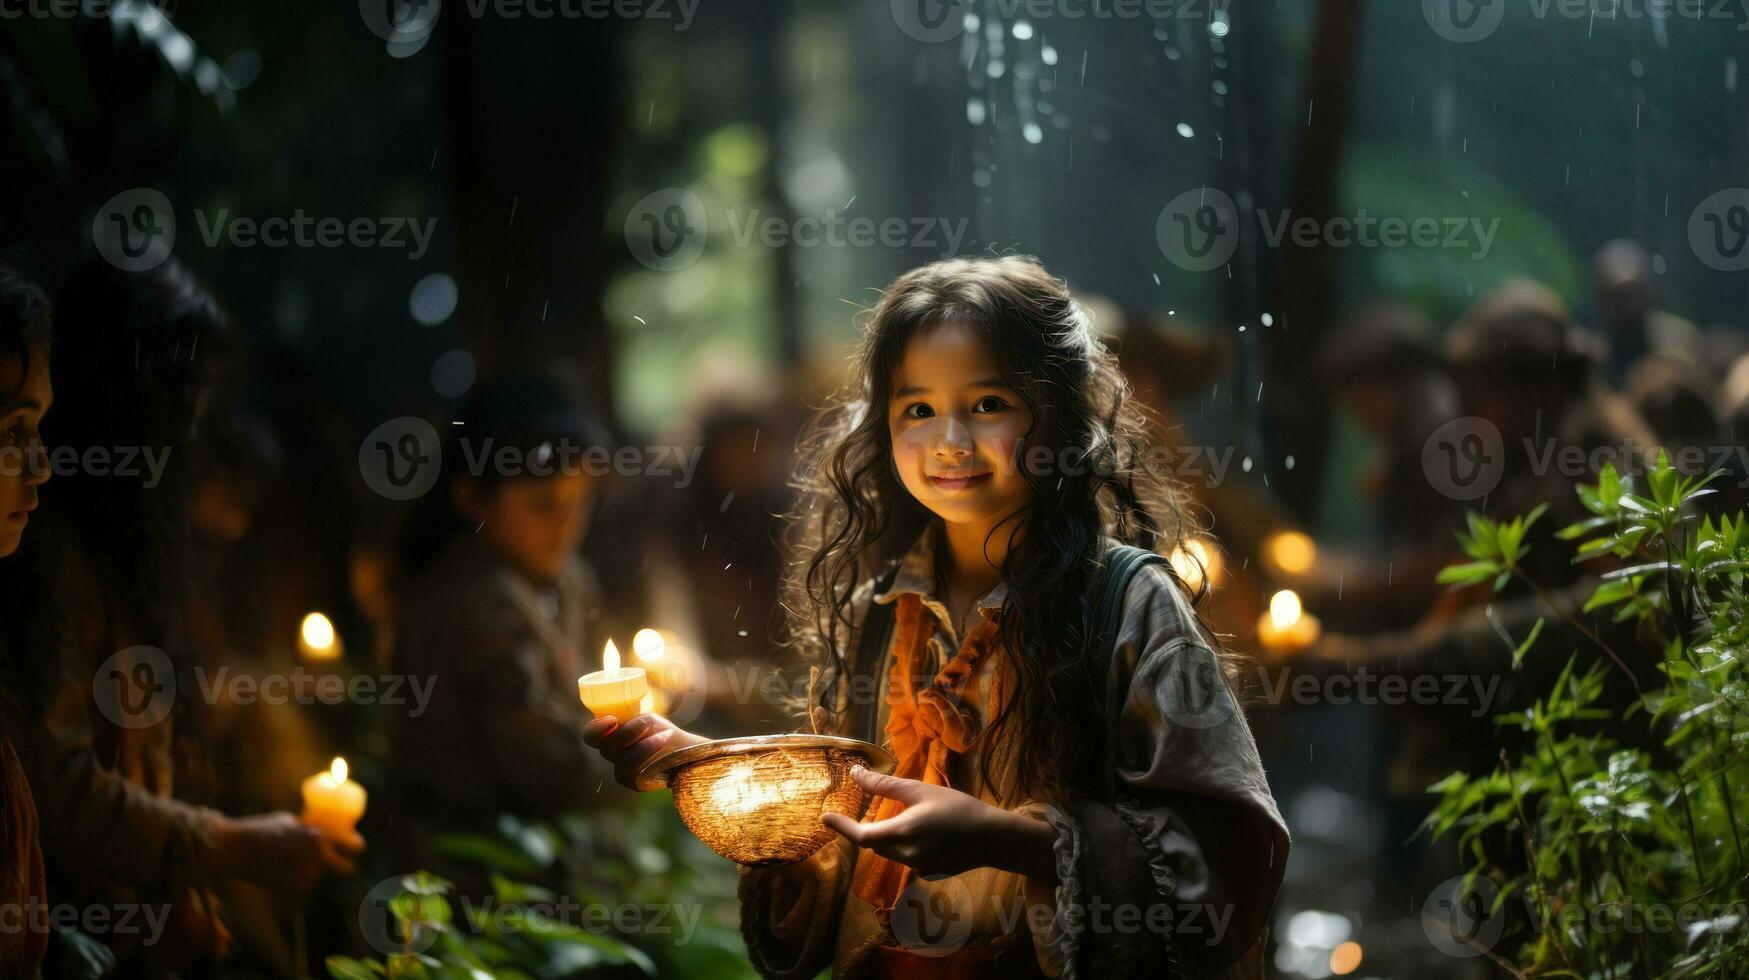 Unidentified asian girl lighting candles in a temple in Chiang Mai, Thailand. photo